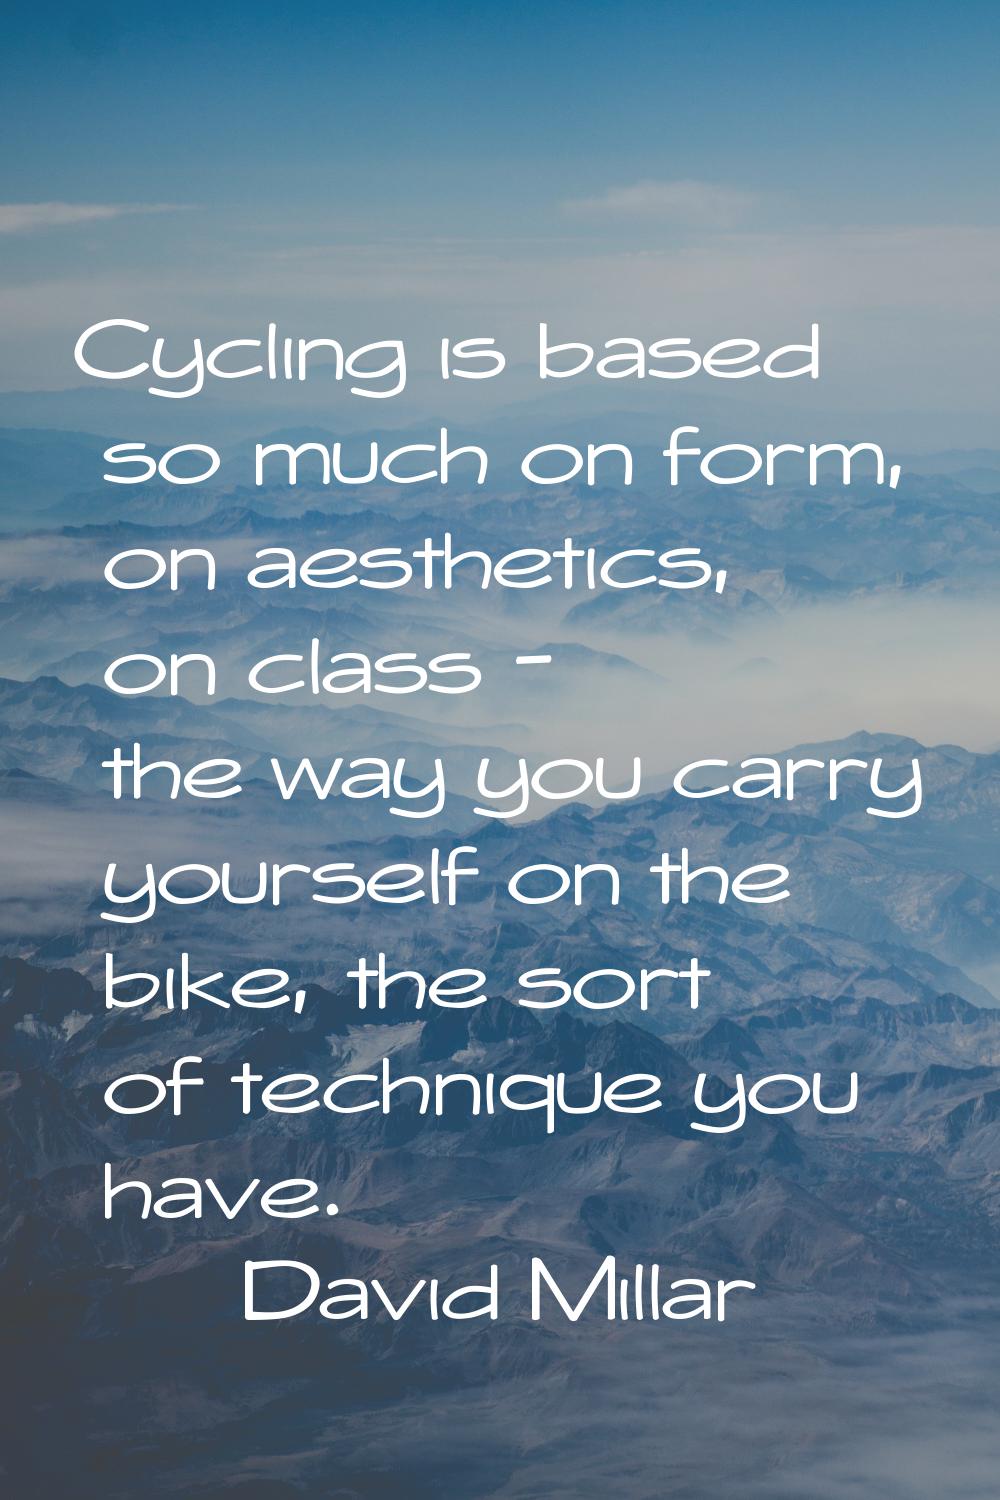 Cycling is based so much on form, on aesthetics, on class - the way you carry yourself on the bike,